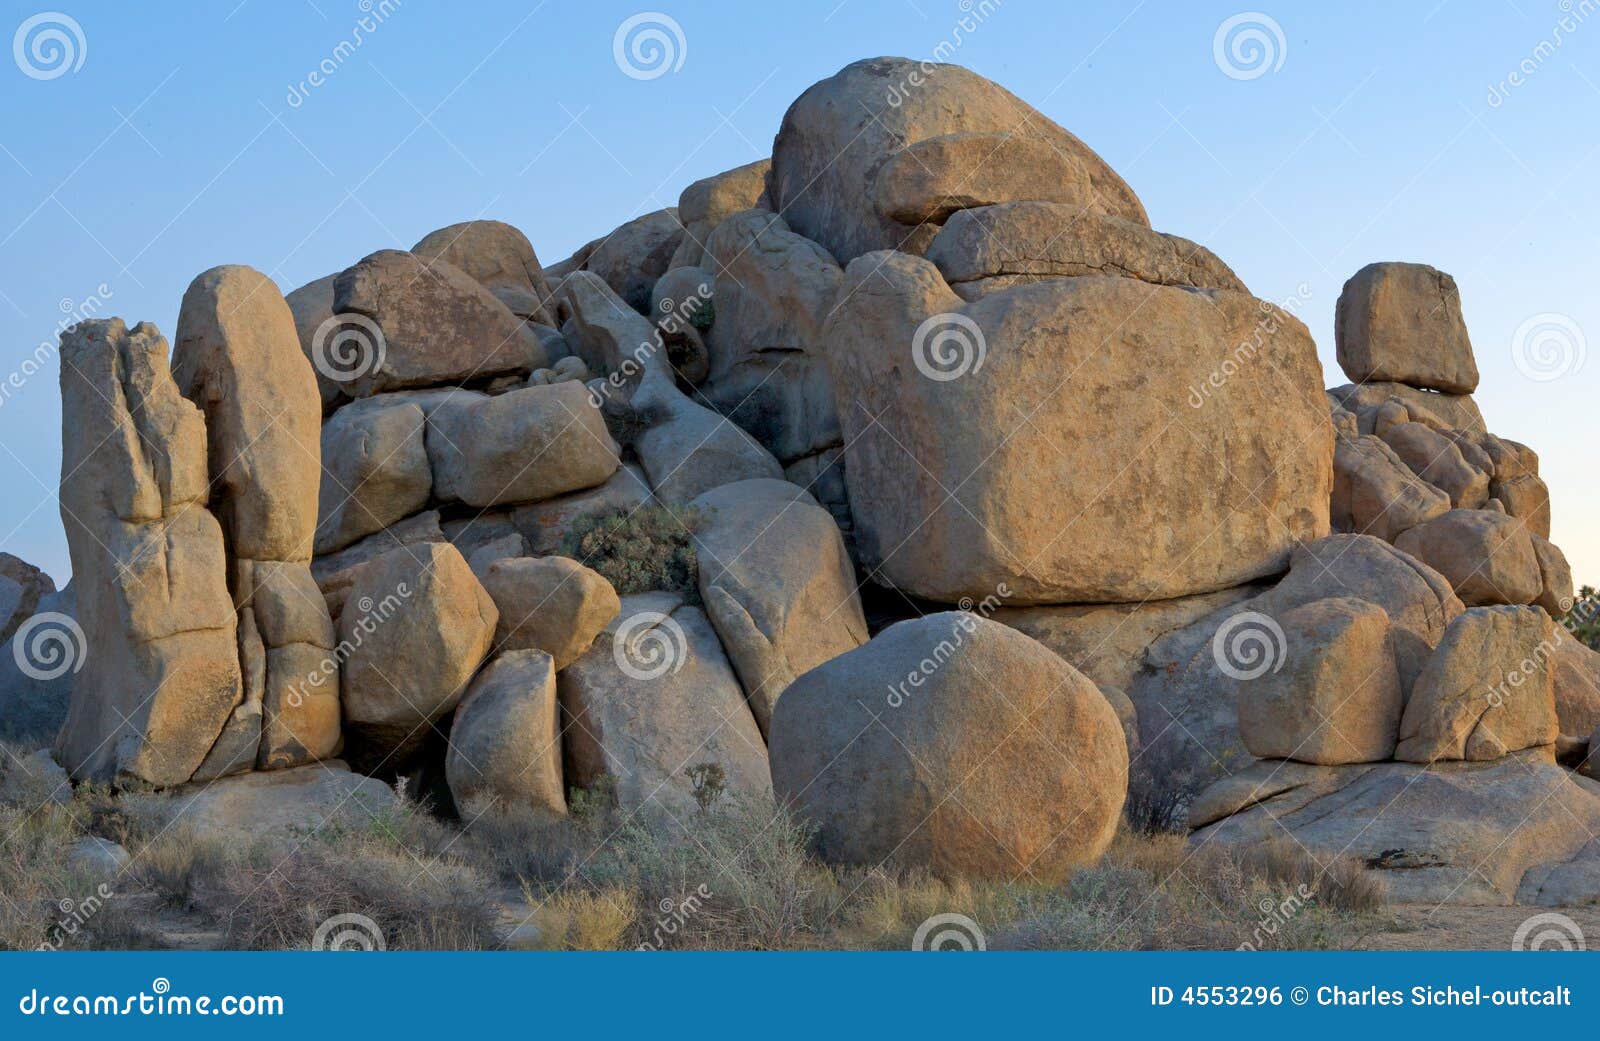 geological rock formations